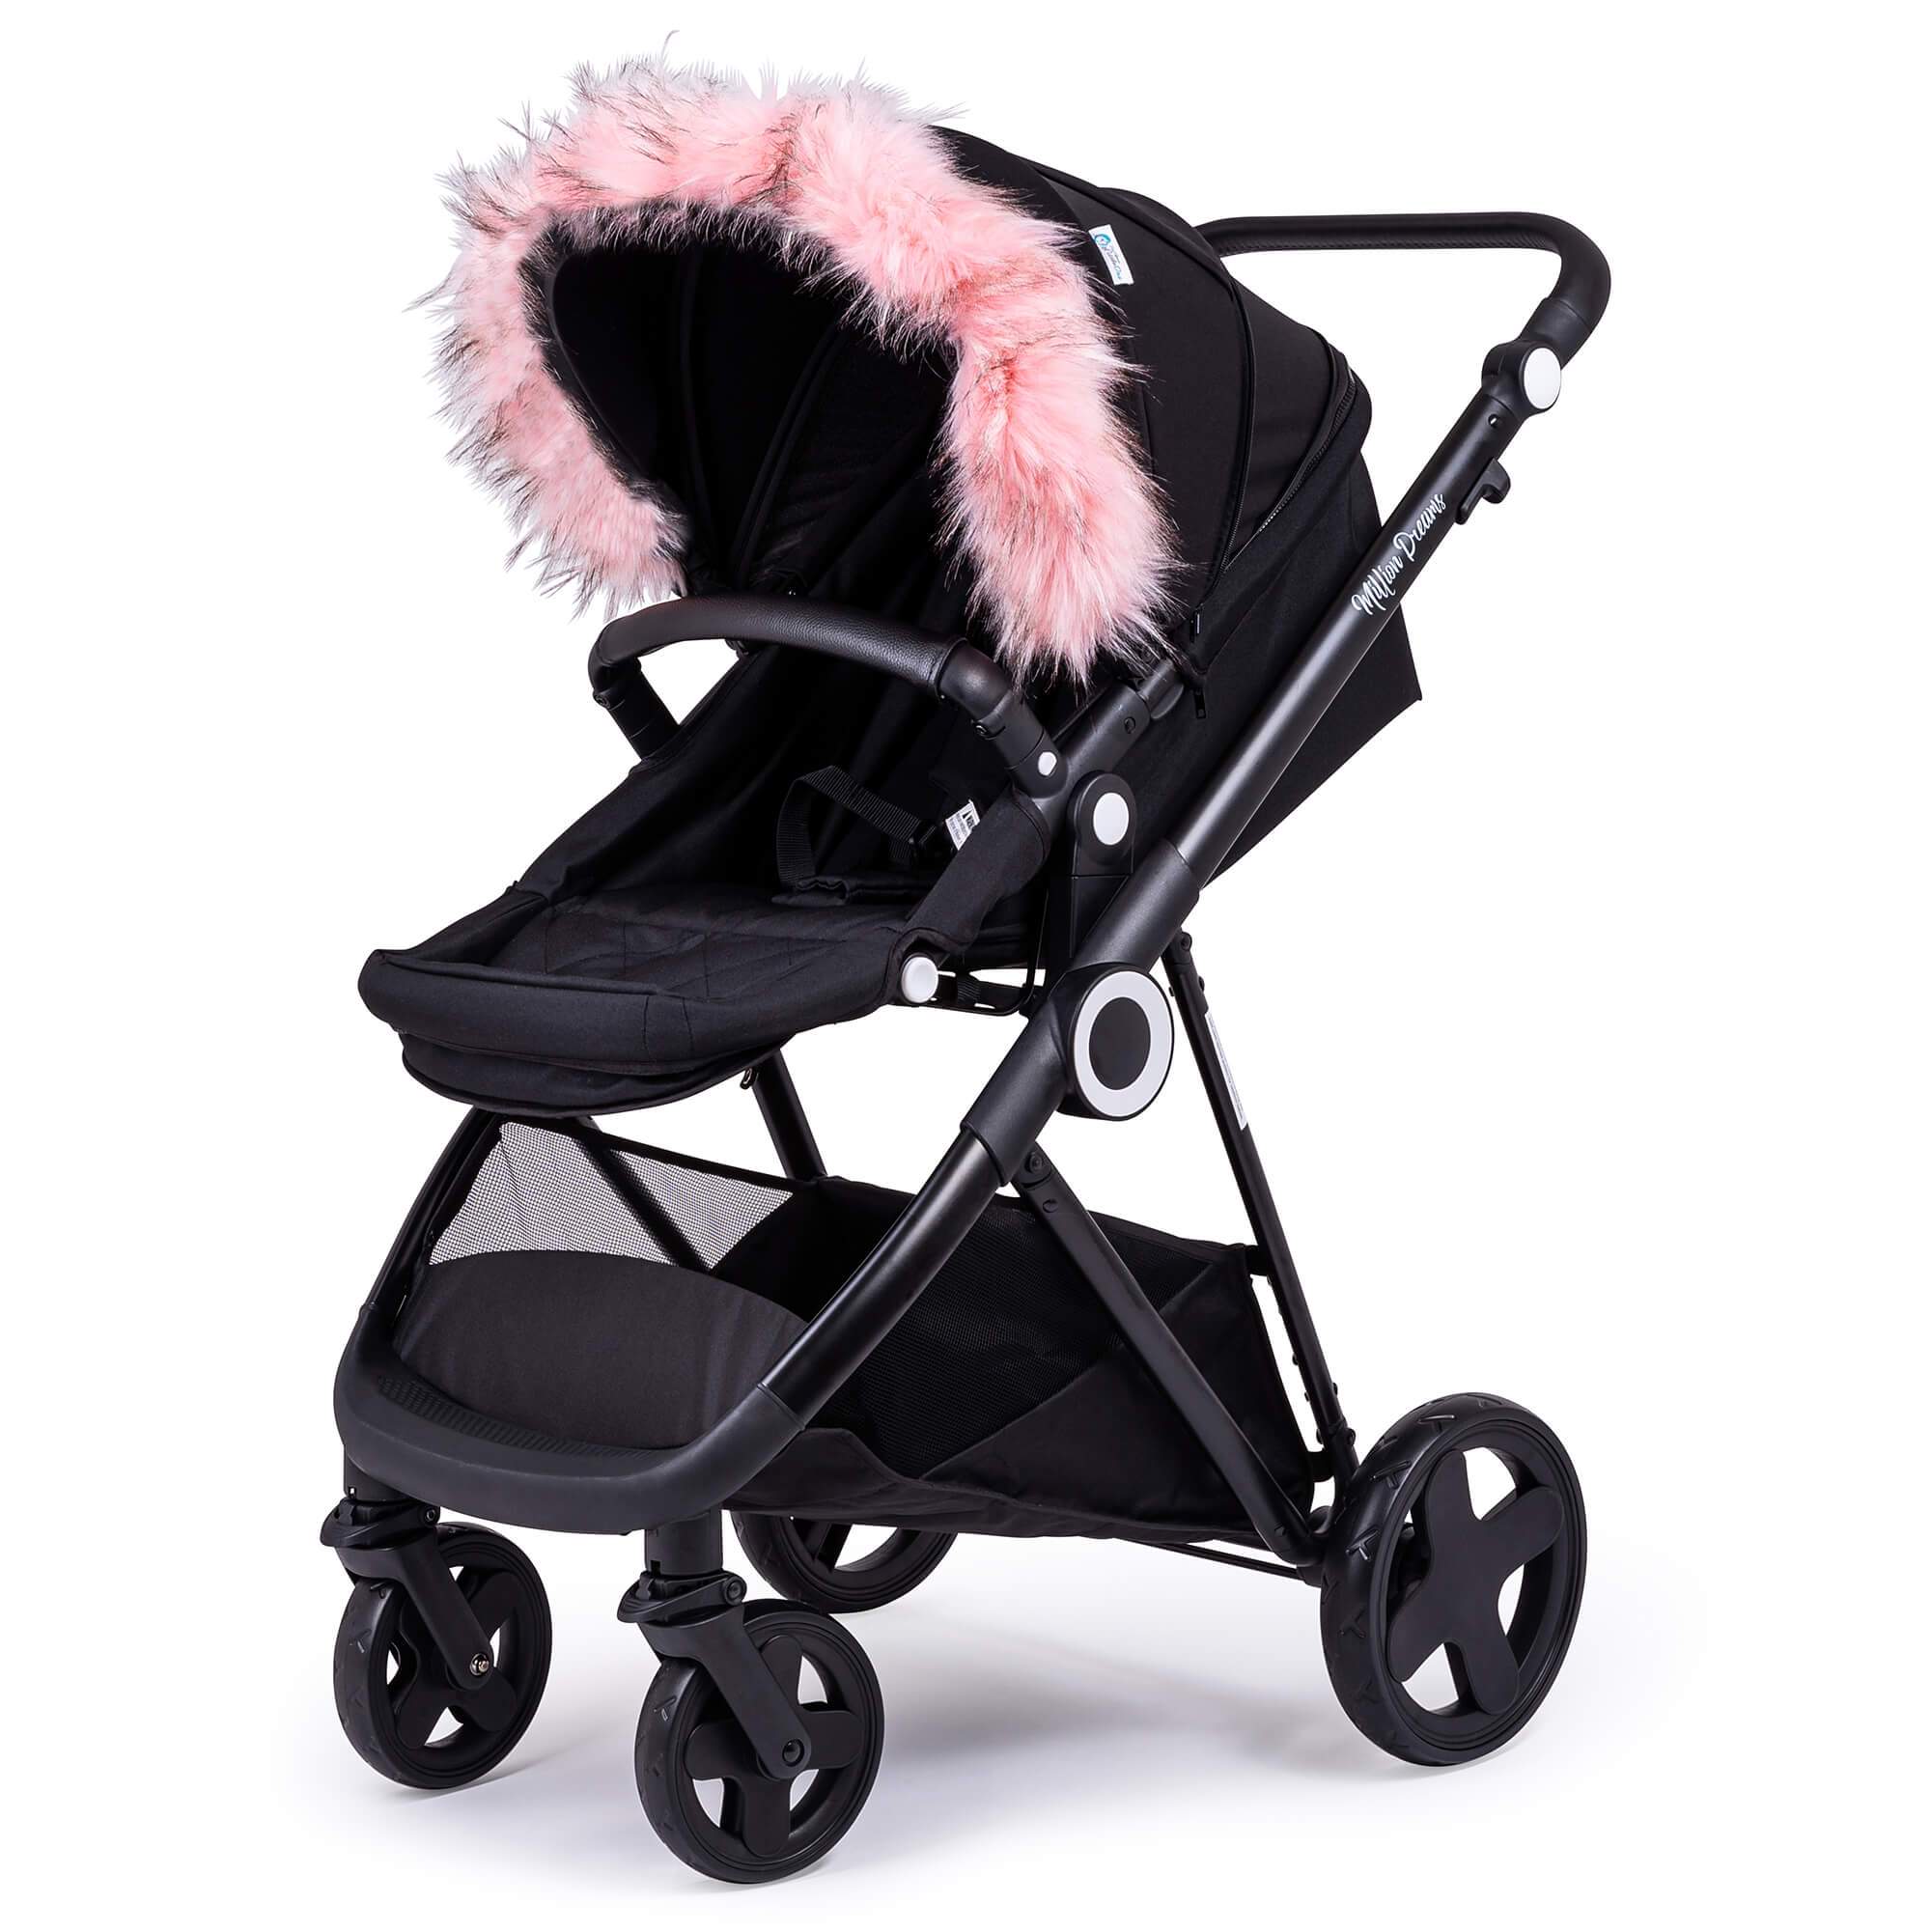 Pram Fur Hood Trim Attachment for Pushchair Compatible with Norton - Light Pink / Fits All Models | For Your Little One